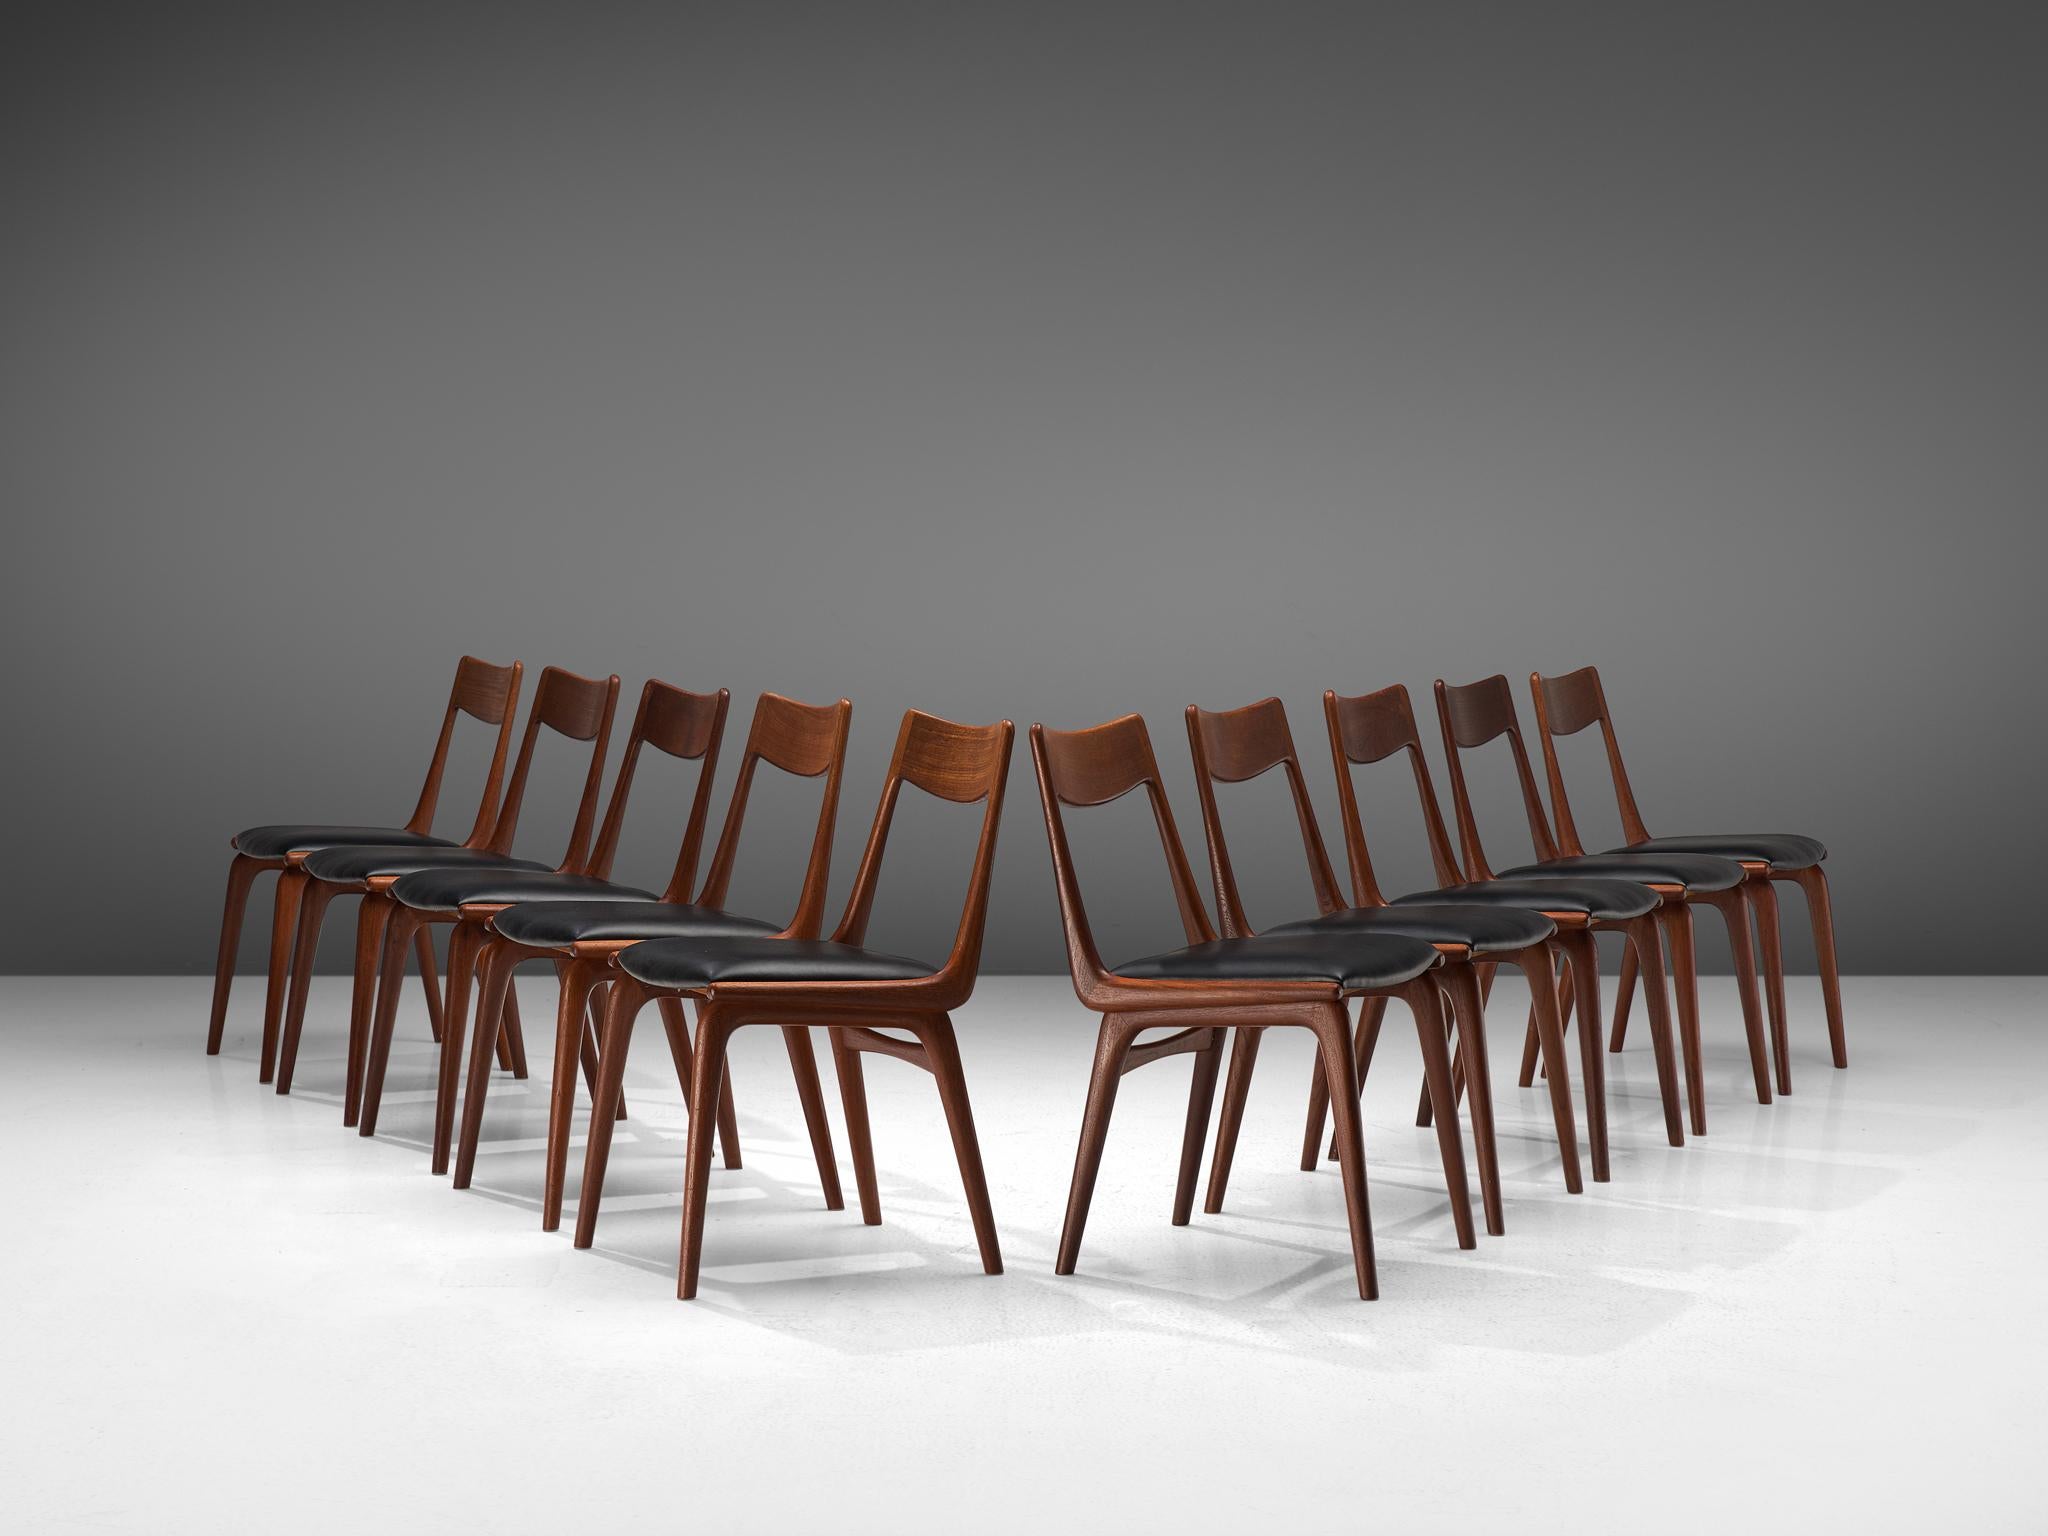 Alfred Christensen for Slagelse Møbelvaerk, set of 10 dining chairs, teak and leatherette, Denmark, 1960s

Elegant set of Danish dining chairs, featuring a teak frame. Seen from the side, the seat's frame that flows over to the backrest has a